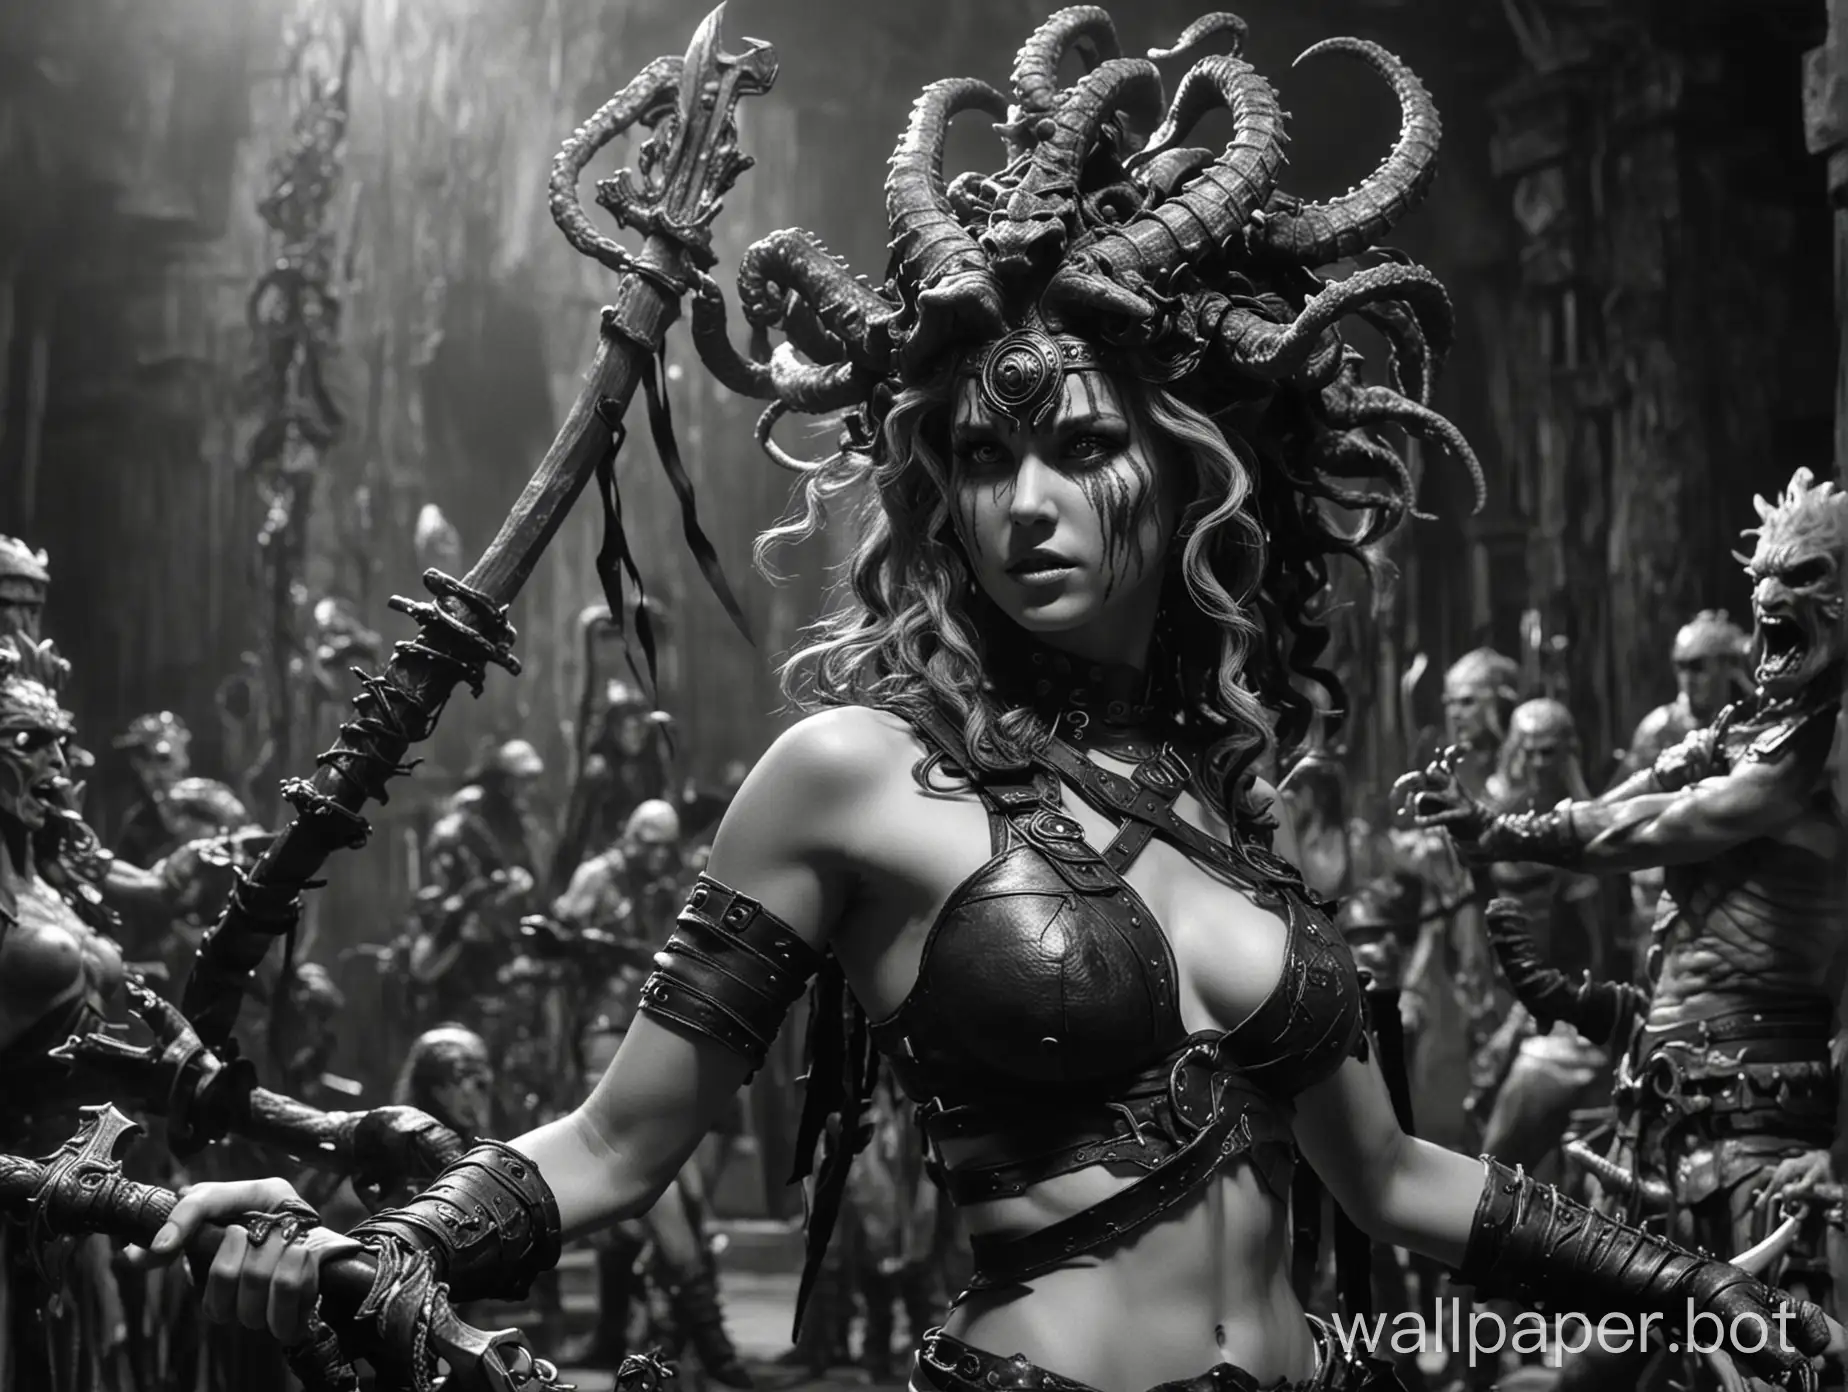 ghastly glitchpunk the final fantasy gorgon medusa barbarian in dvd still of the dungeons and dragons movie, ritual in,black and white photography, high contrast photography, sharp super contrast